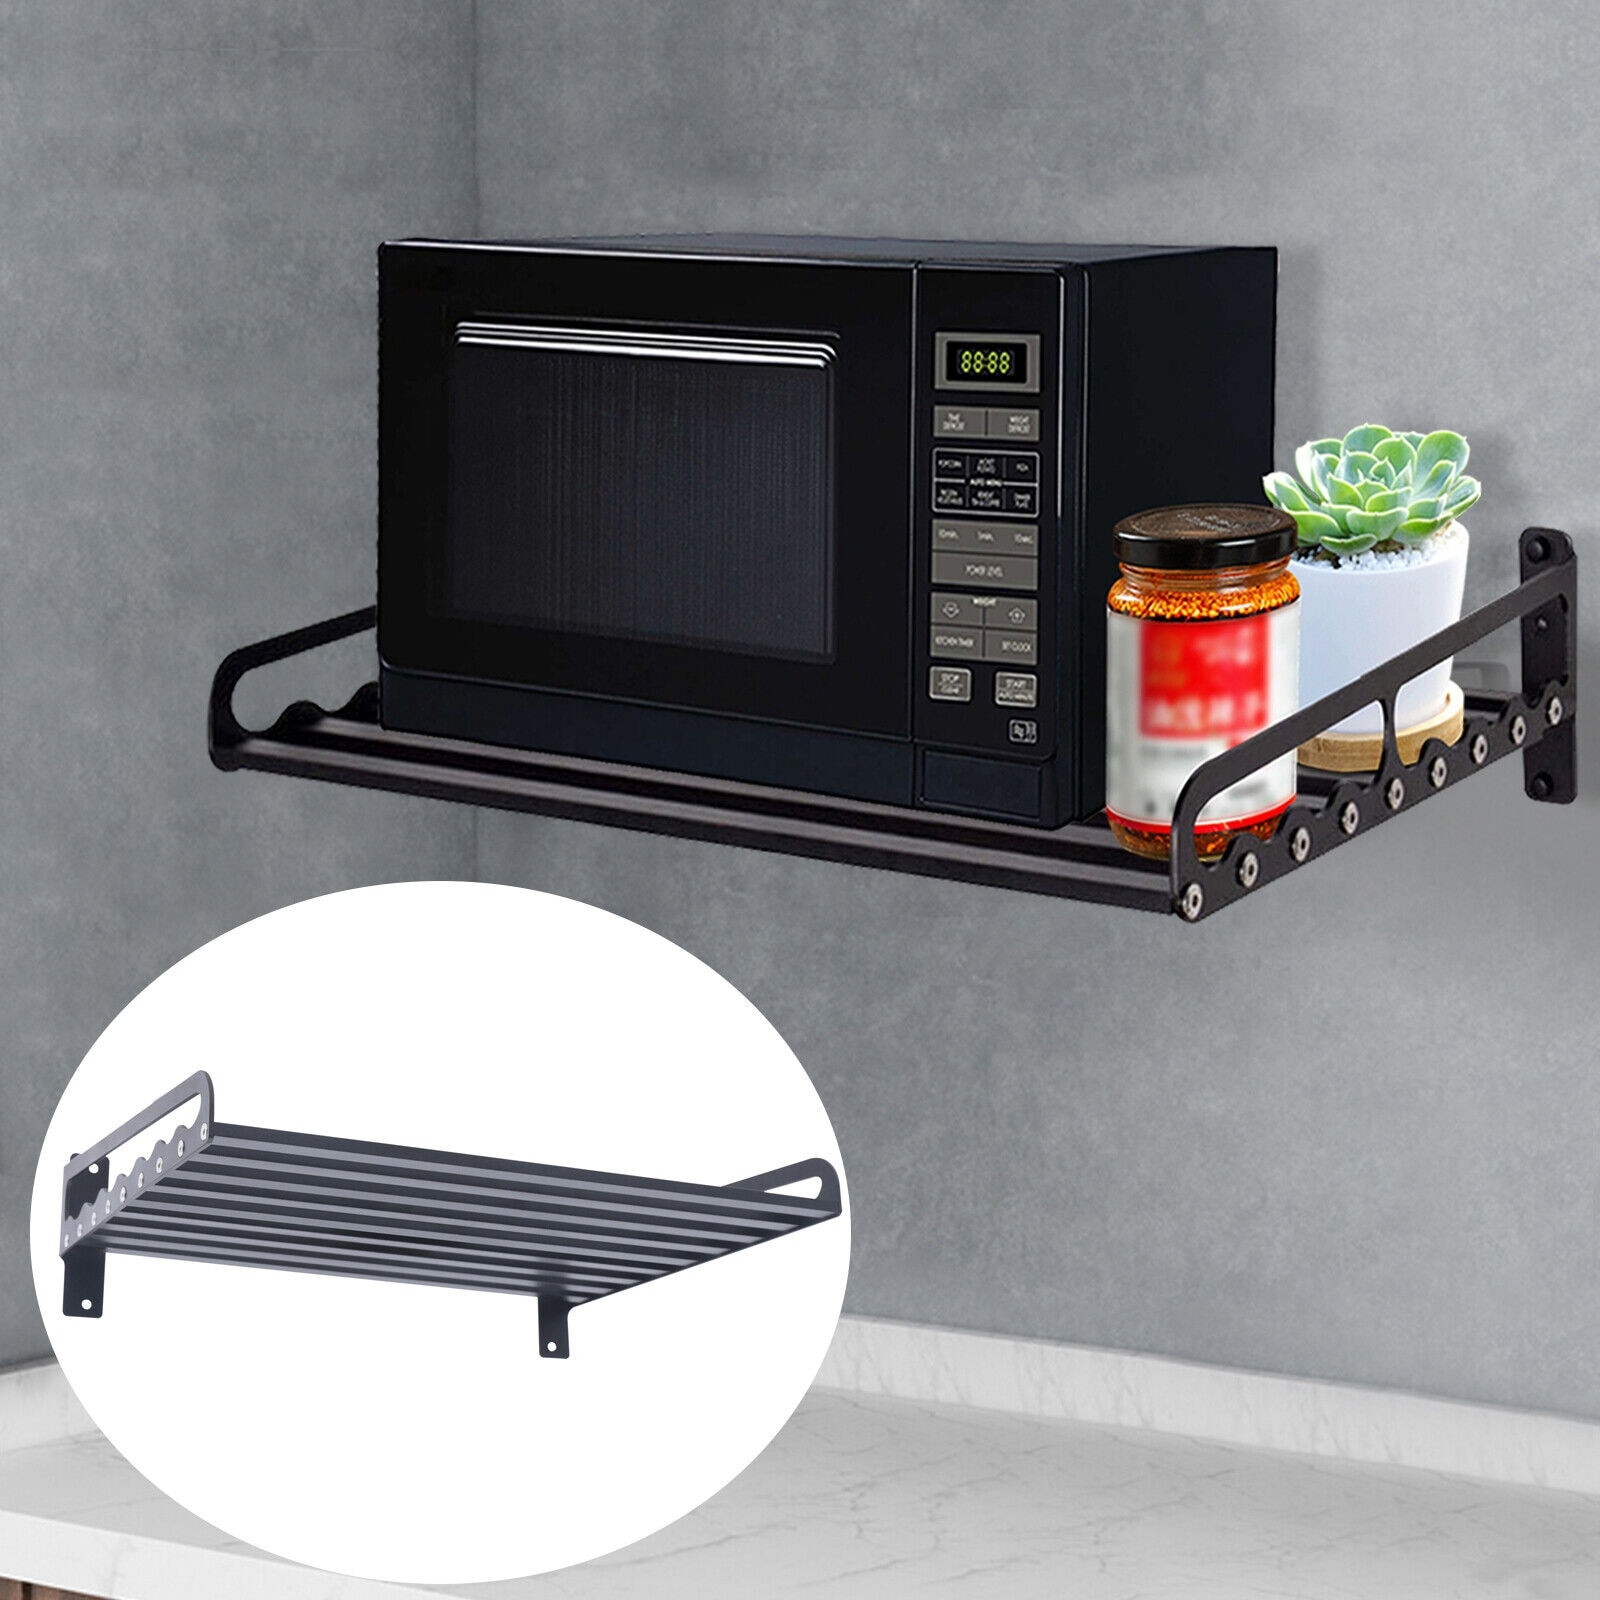 https://ak1.ostkcdn.com/images/products/is/images/direct/66ab3b7e5613ef270f3c53465c6f4a4d2bfac37d/Wall-Mounted-Microwave-Oven-Rack-Kitchen-Bakers-Rack-Space-Saving.jpg